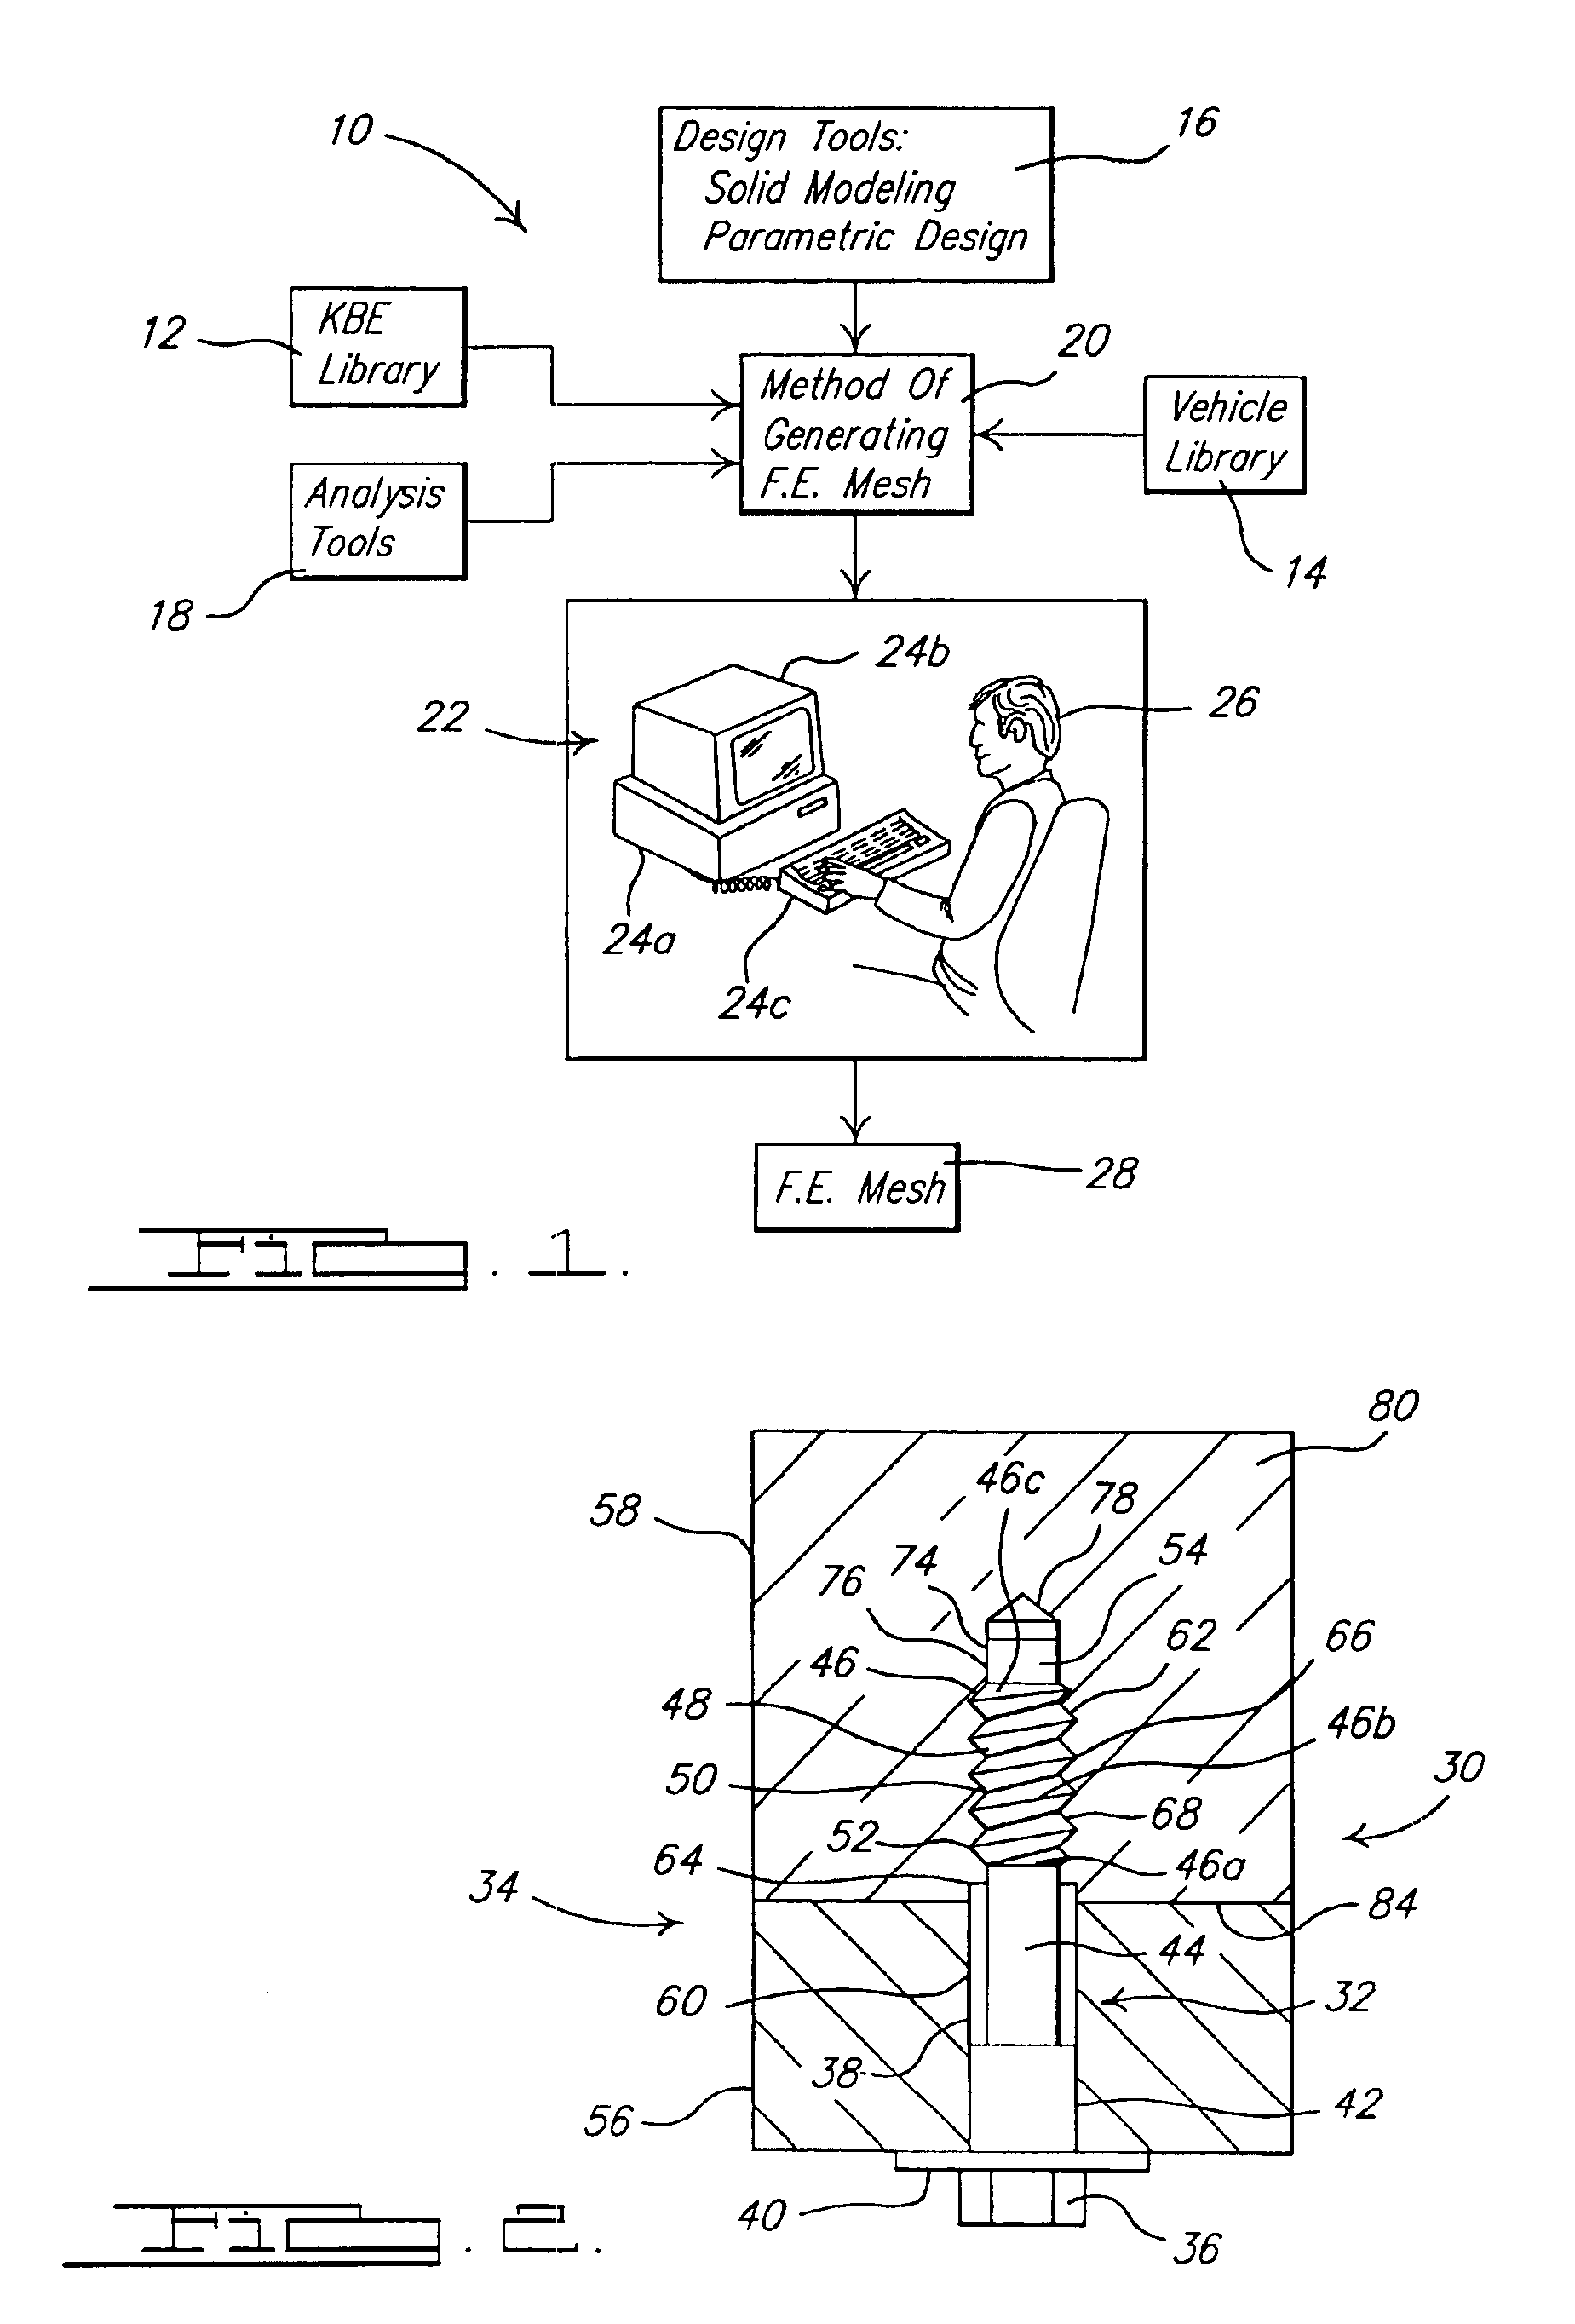 System and method of generating a finite element mesh for a threaded fastener and joining structure assembly